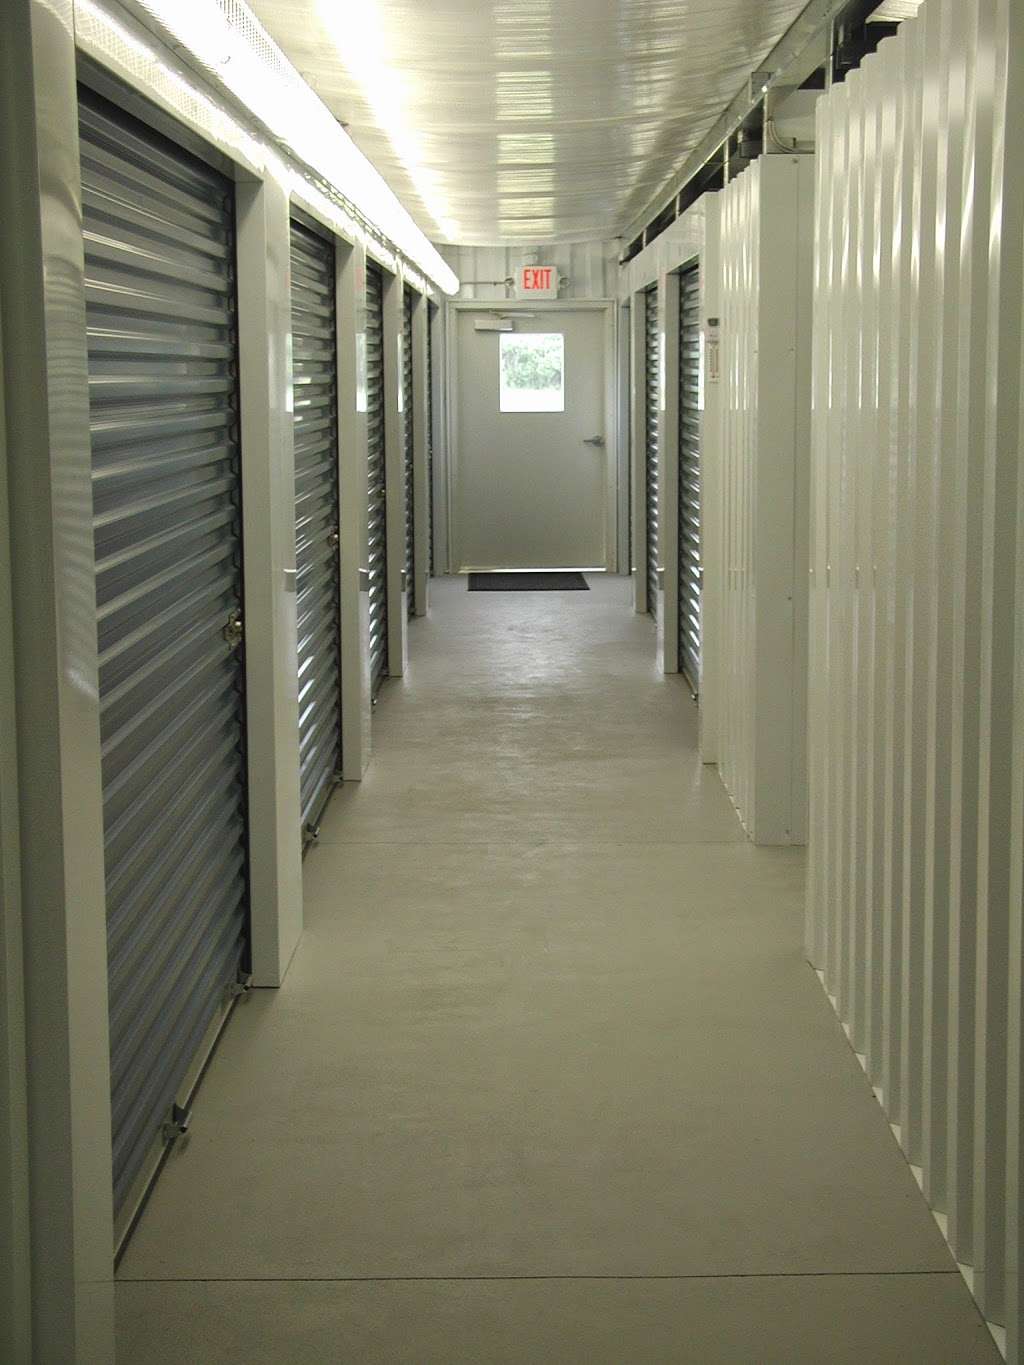 Cape Self Storage | 23 Oyster Rd, Cape May Court House, NJ 08210 | Phone: (609) 465-7895